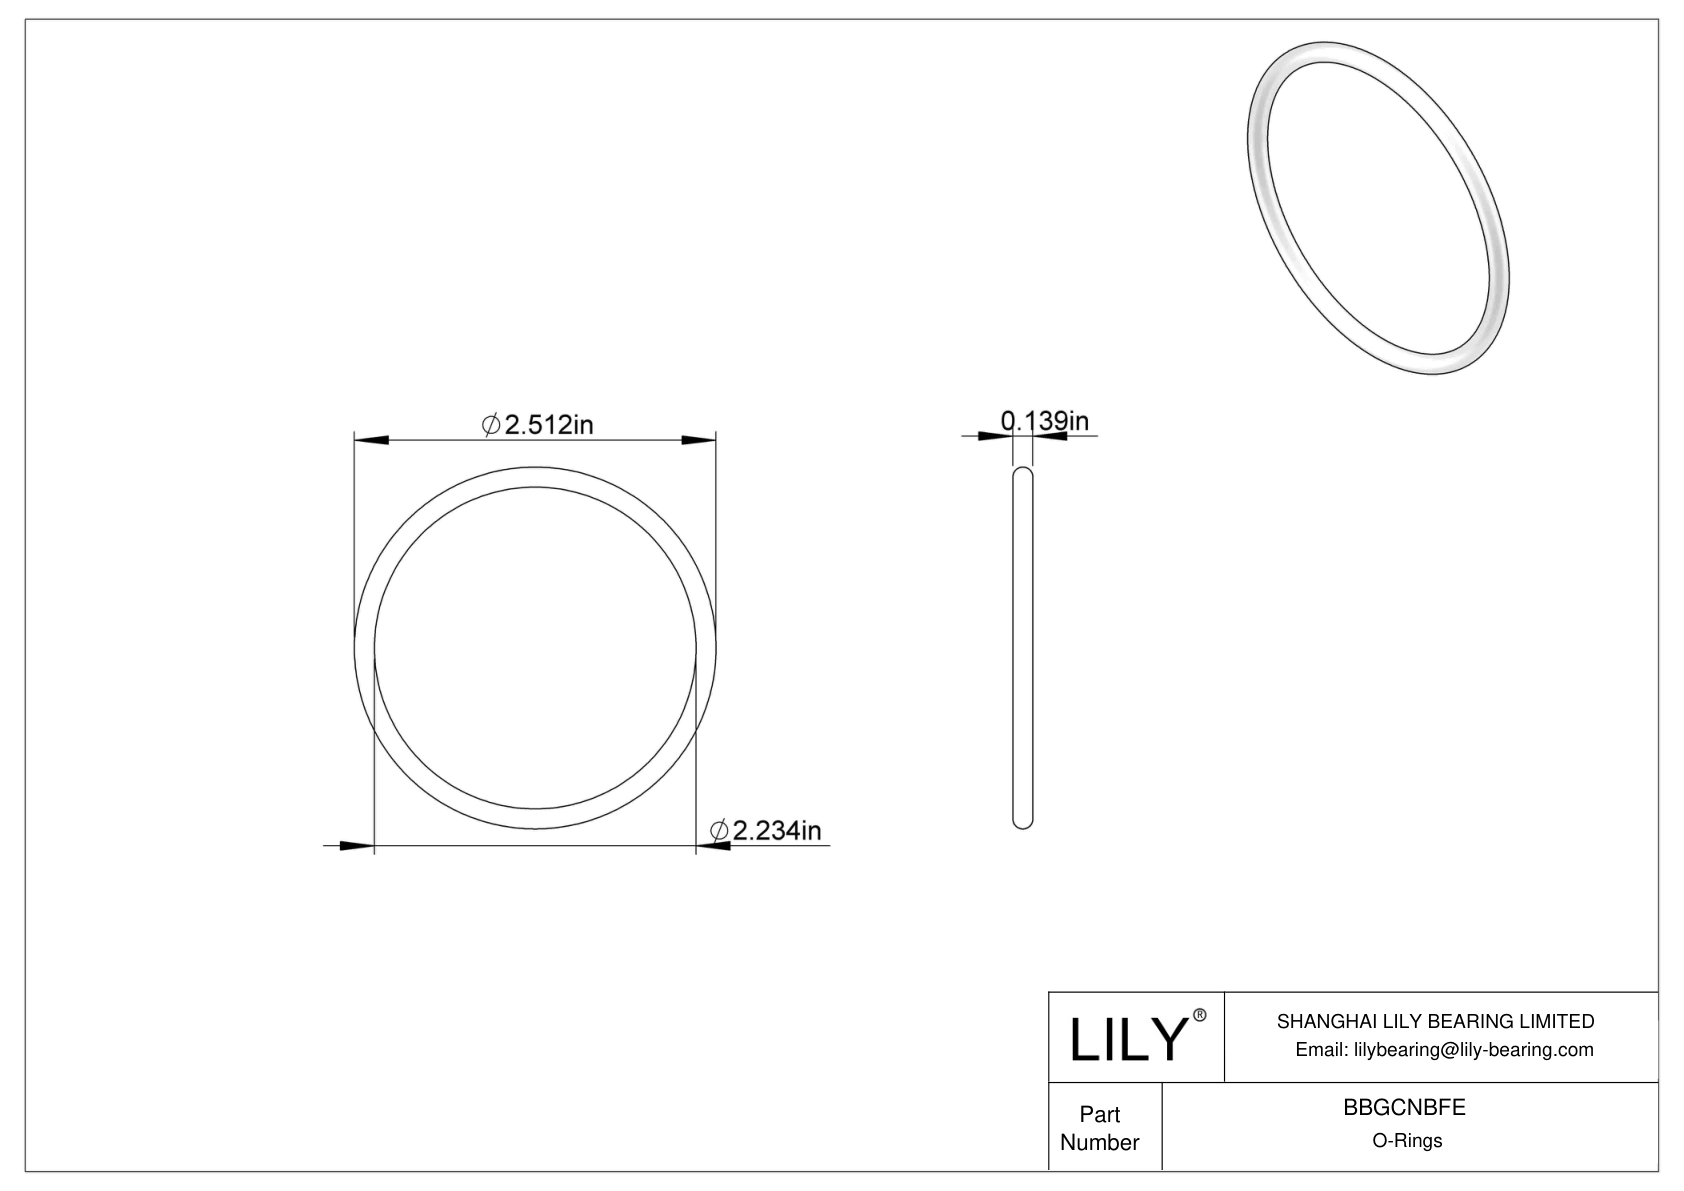 BBGCNBFE High Temperature O-Rings Round cad drawing